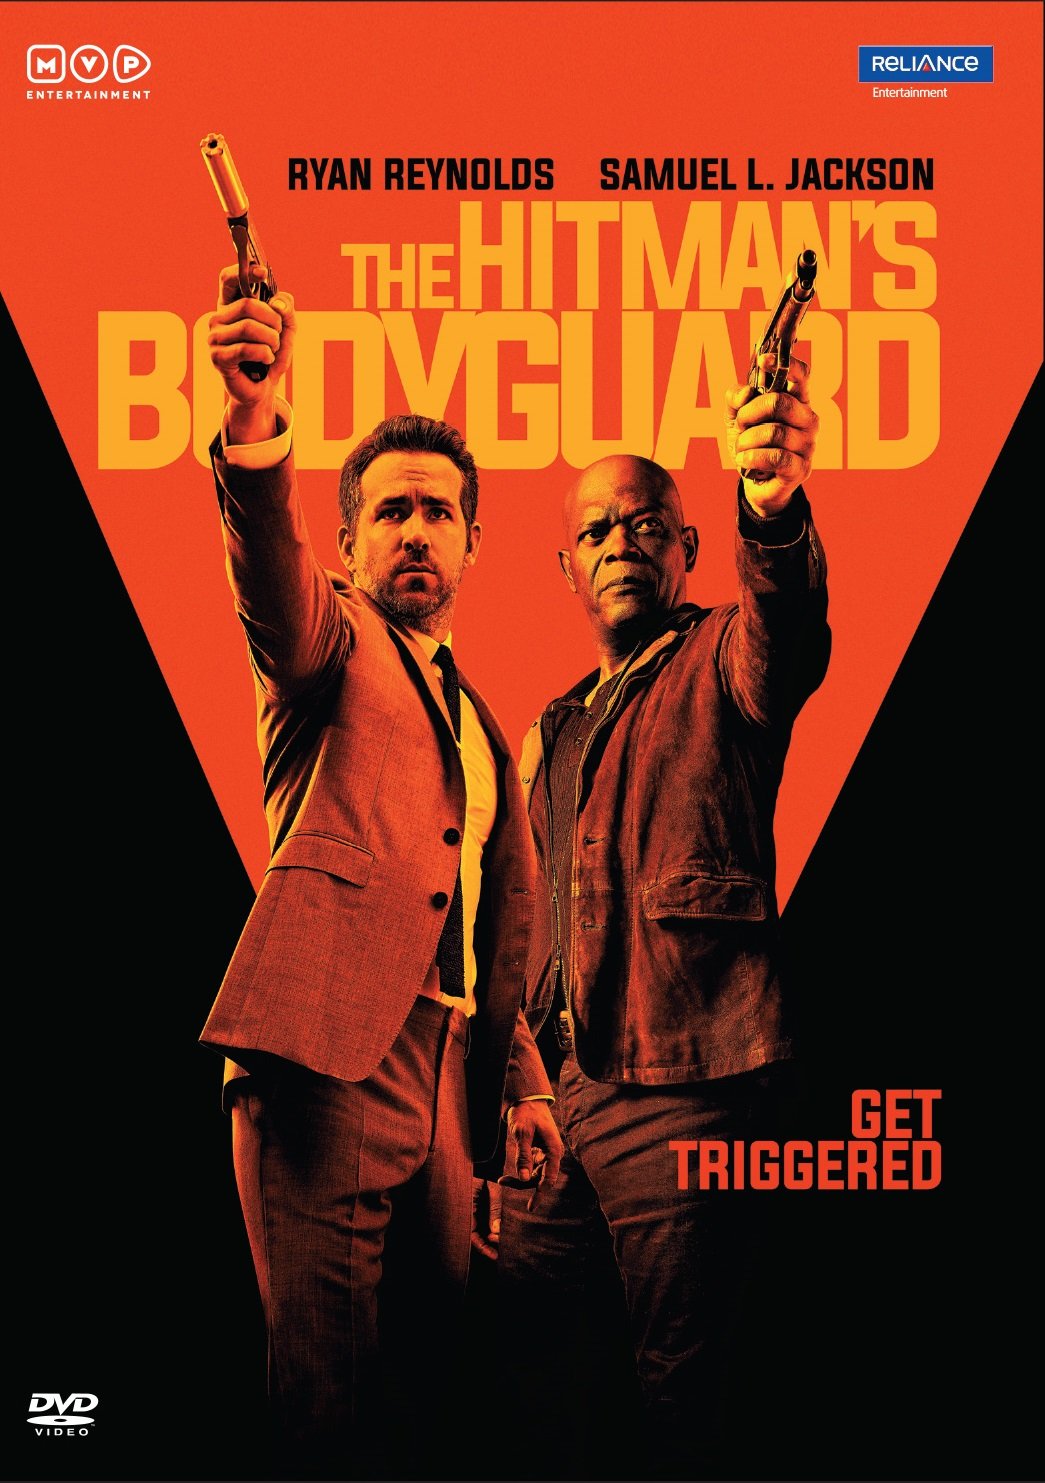 the-hitmans-bodyguard-movie-purchase-or-watch-online